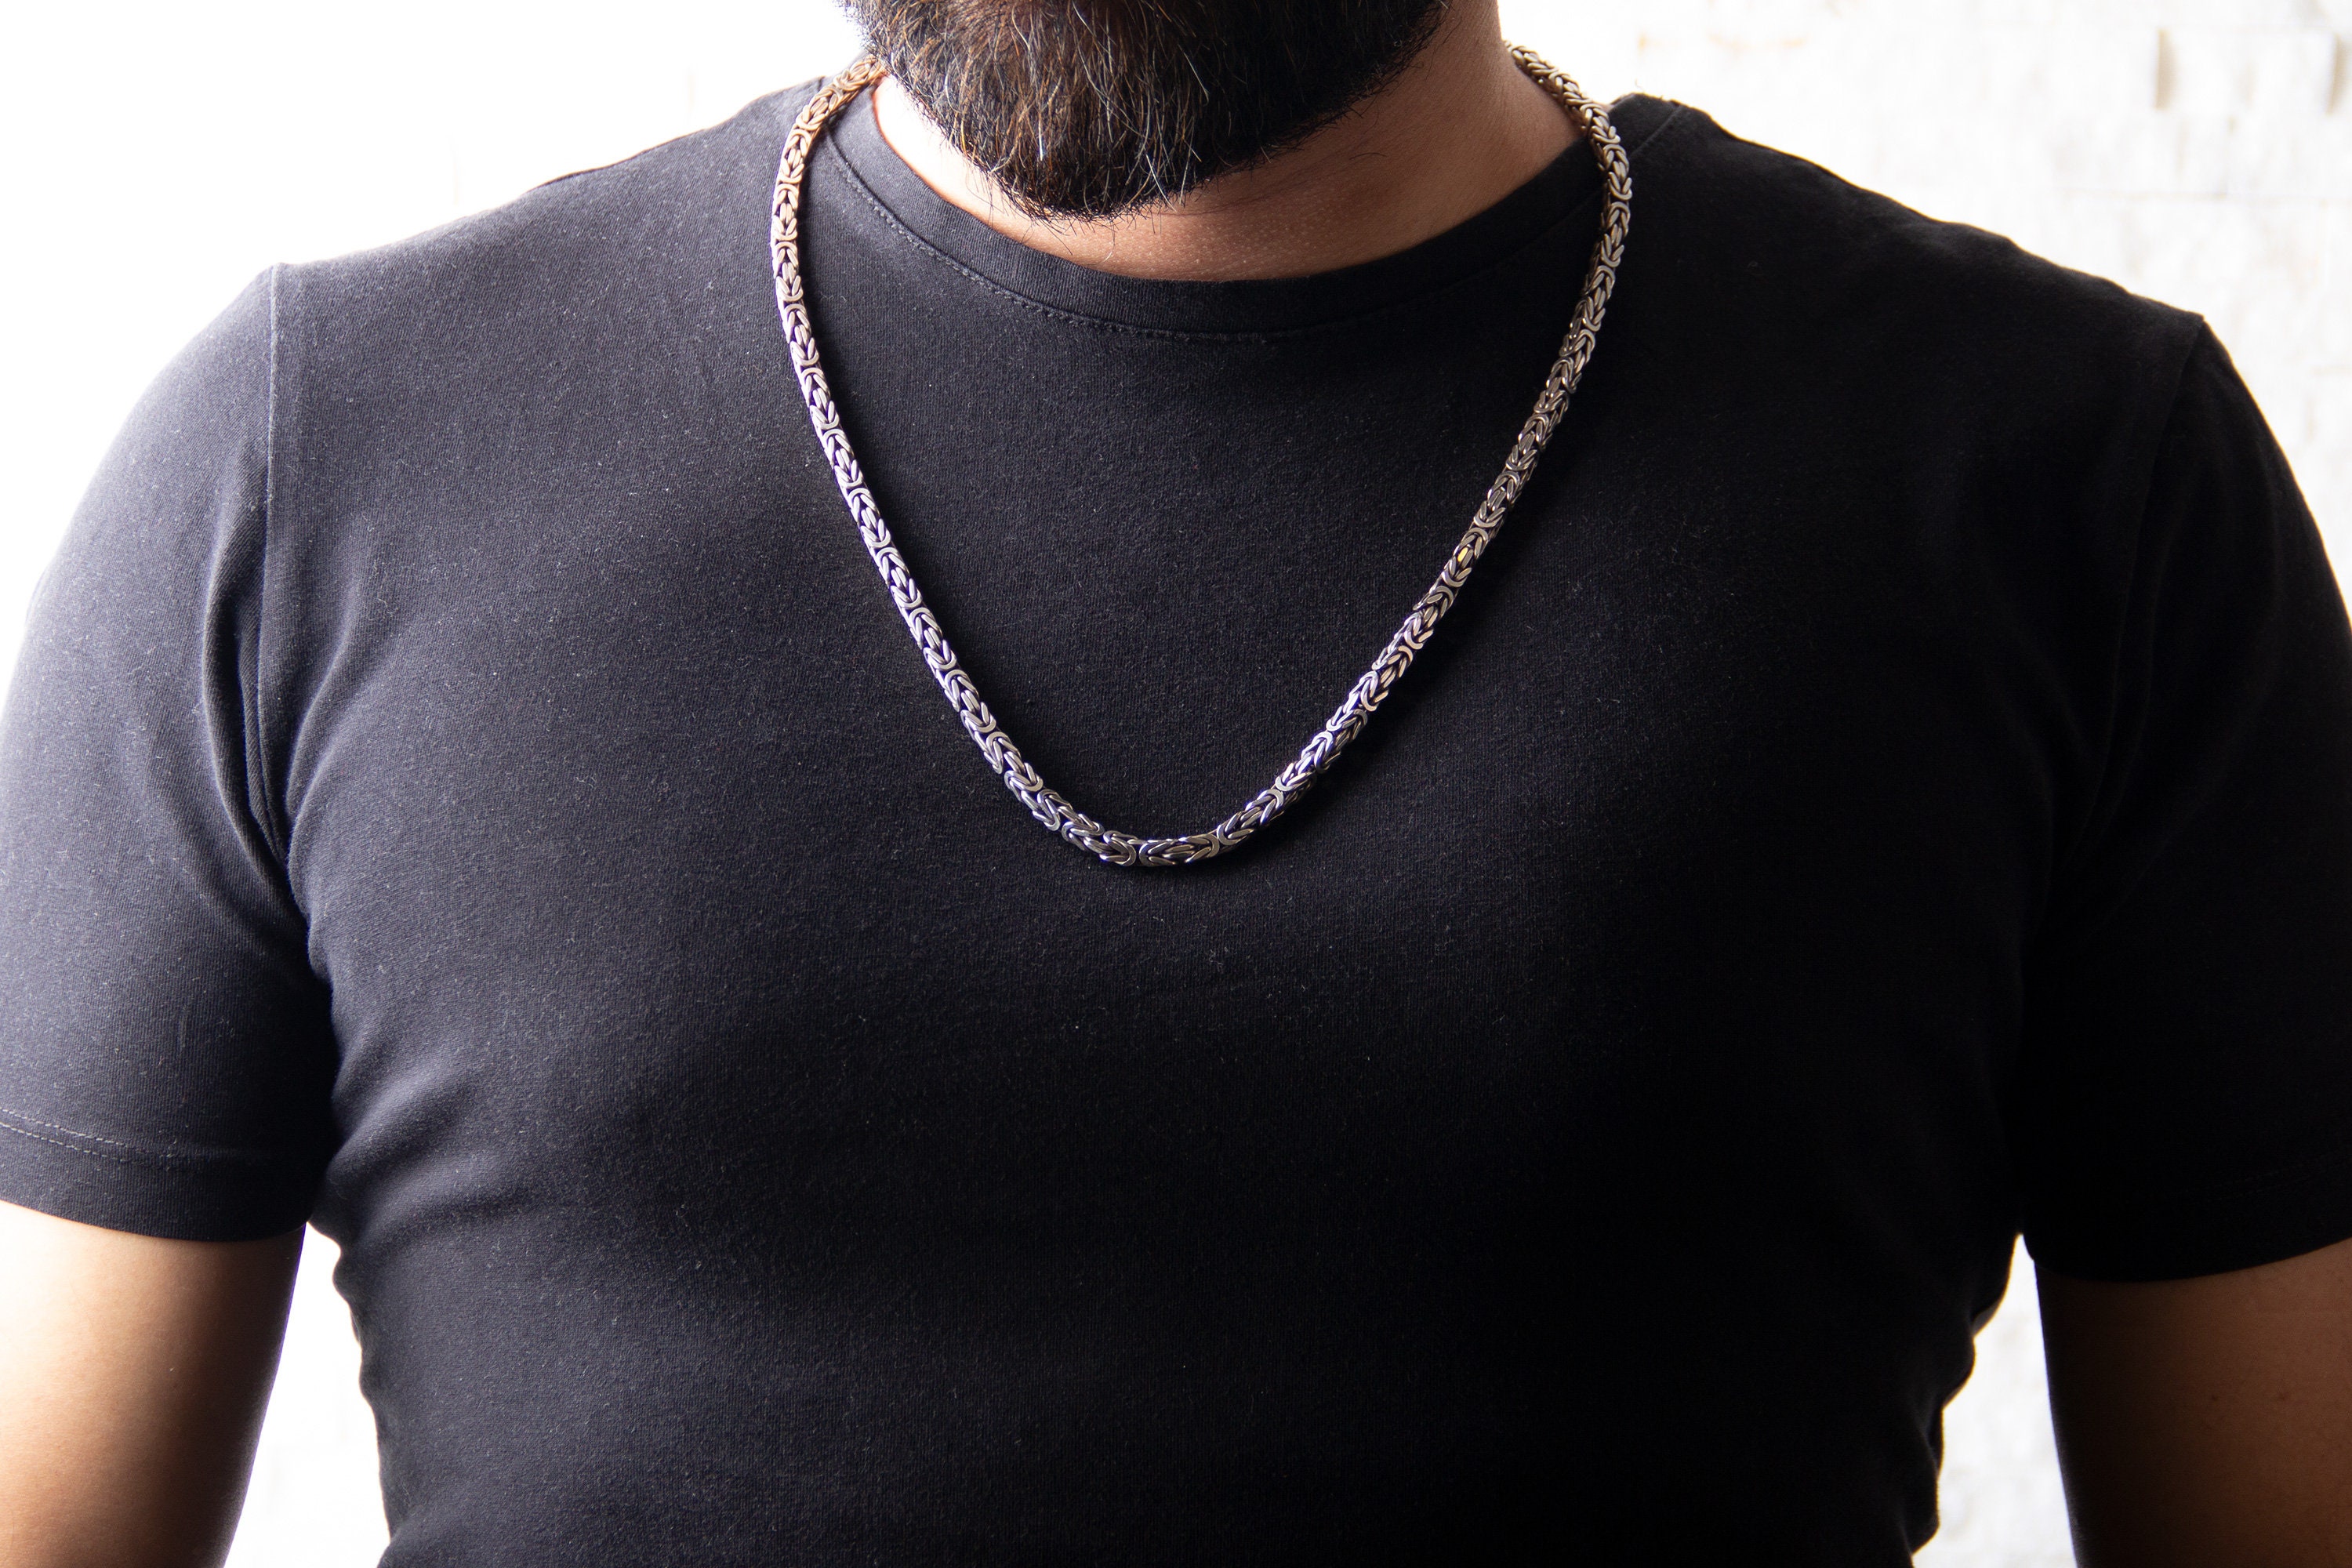 6MM 140 Byzantine Chain .925 Sterling Silver Sizes 